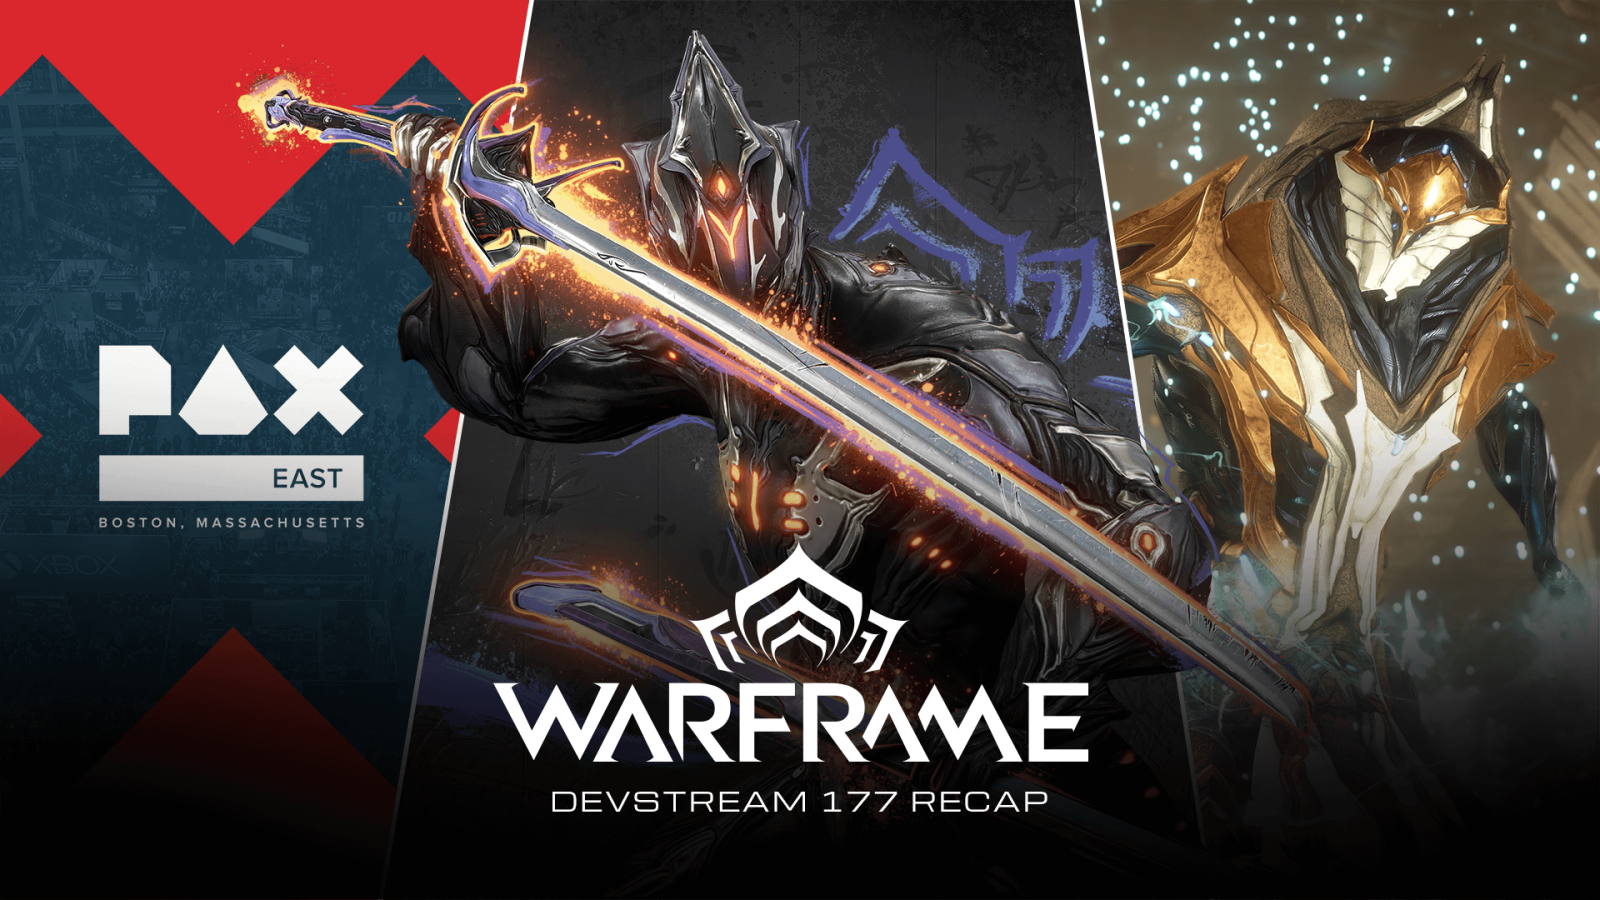 Warframe Sets the Stage for an Action-Packed March with Dante Unbound, 11th Anniversary Celebrations, and More! 1